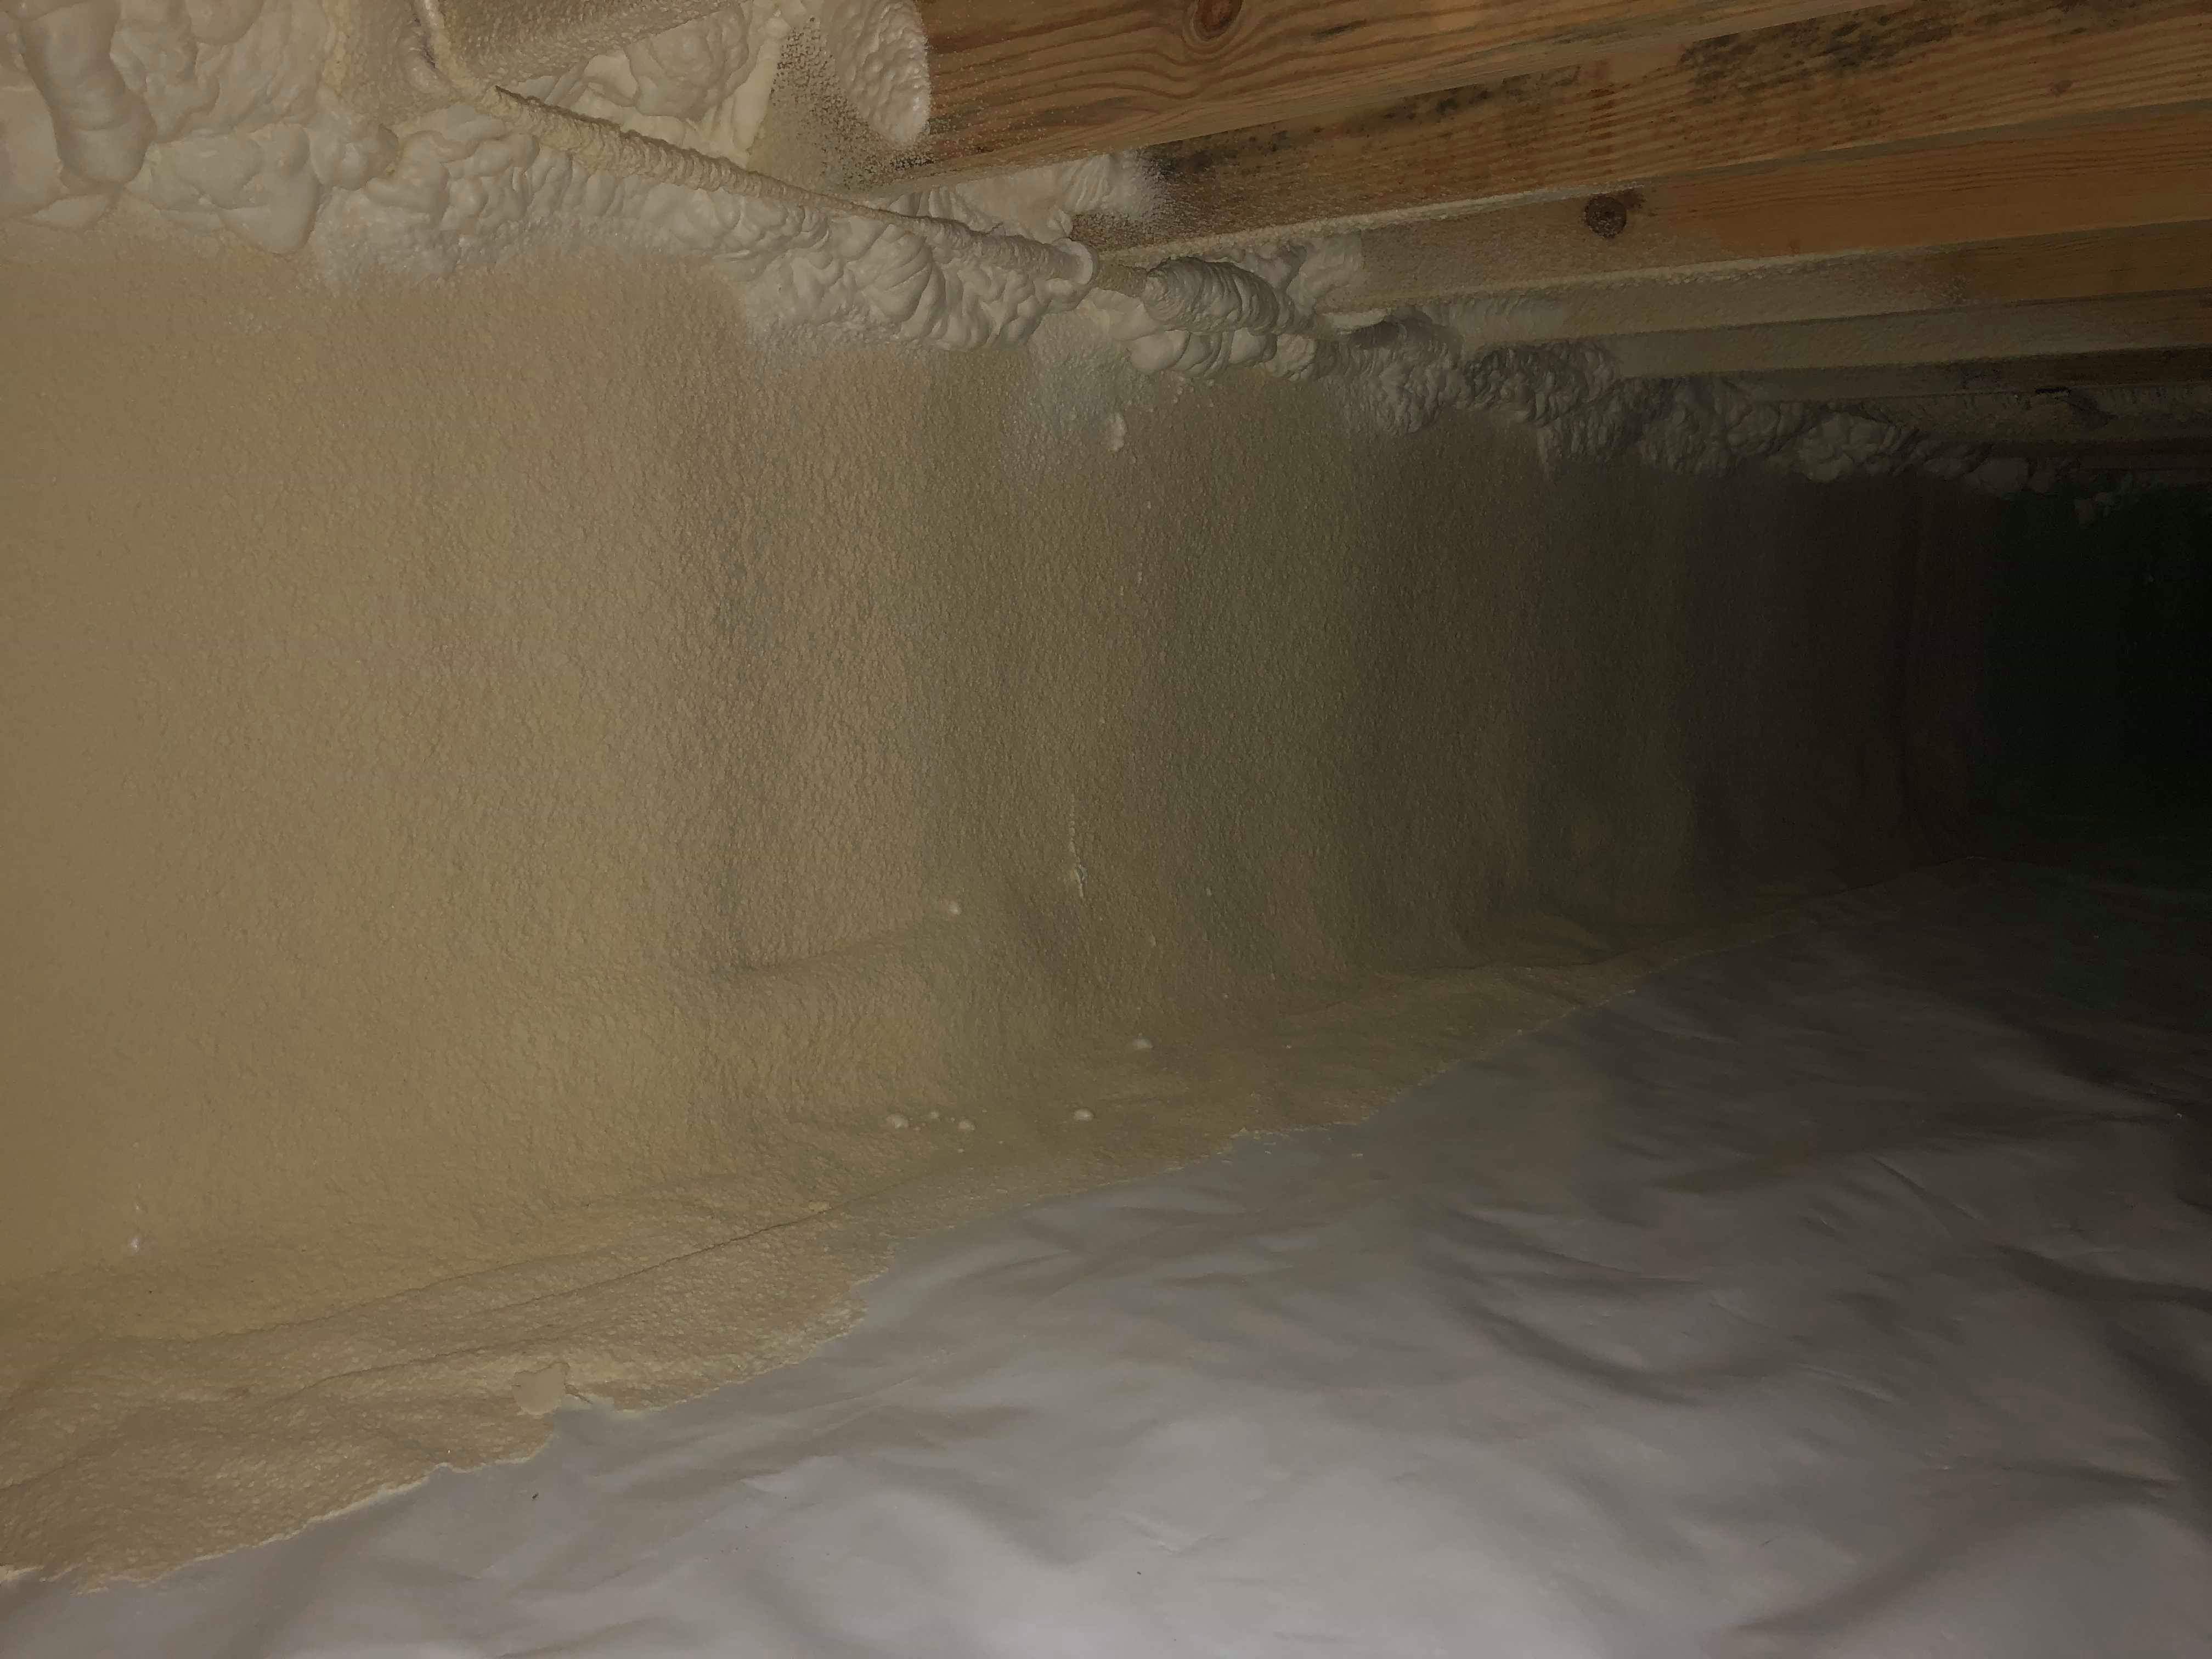 Insulated Walls of Crawlspace